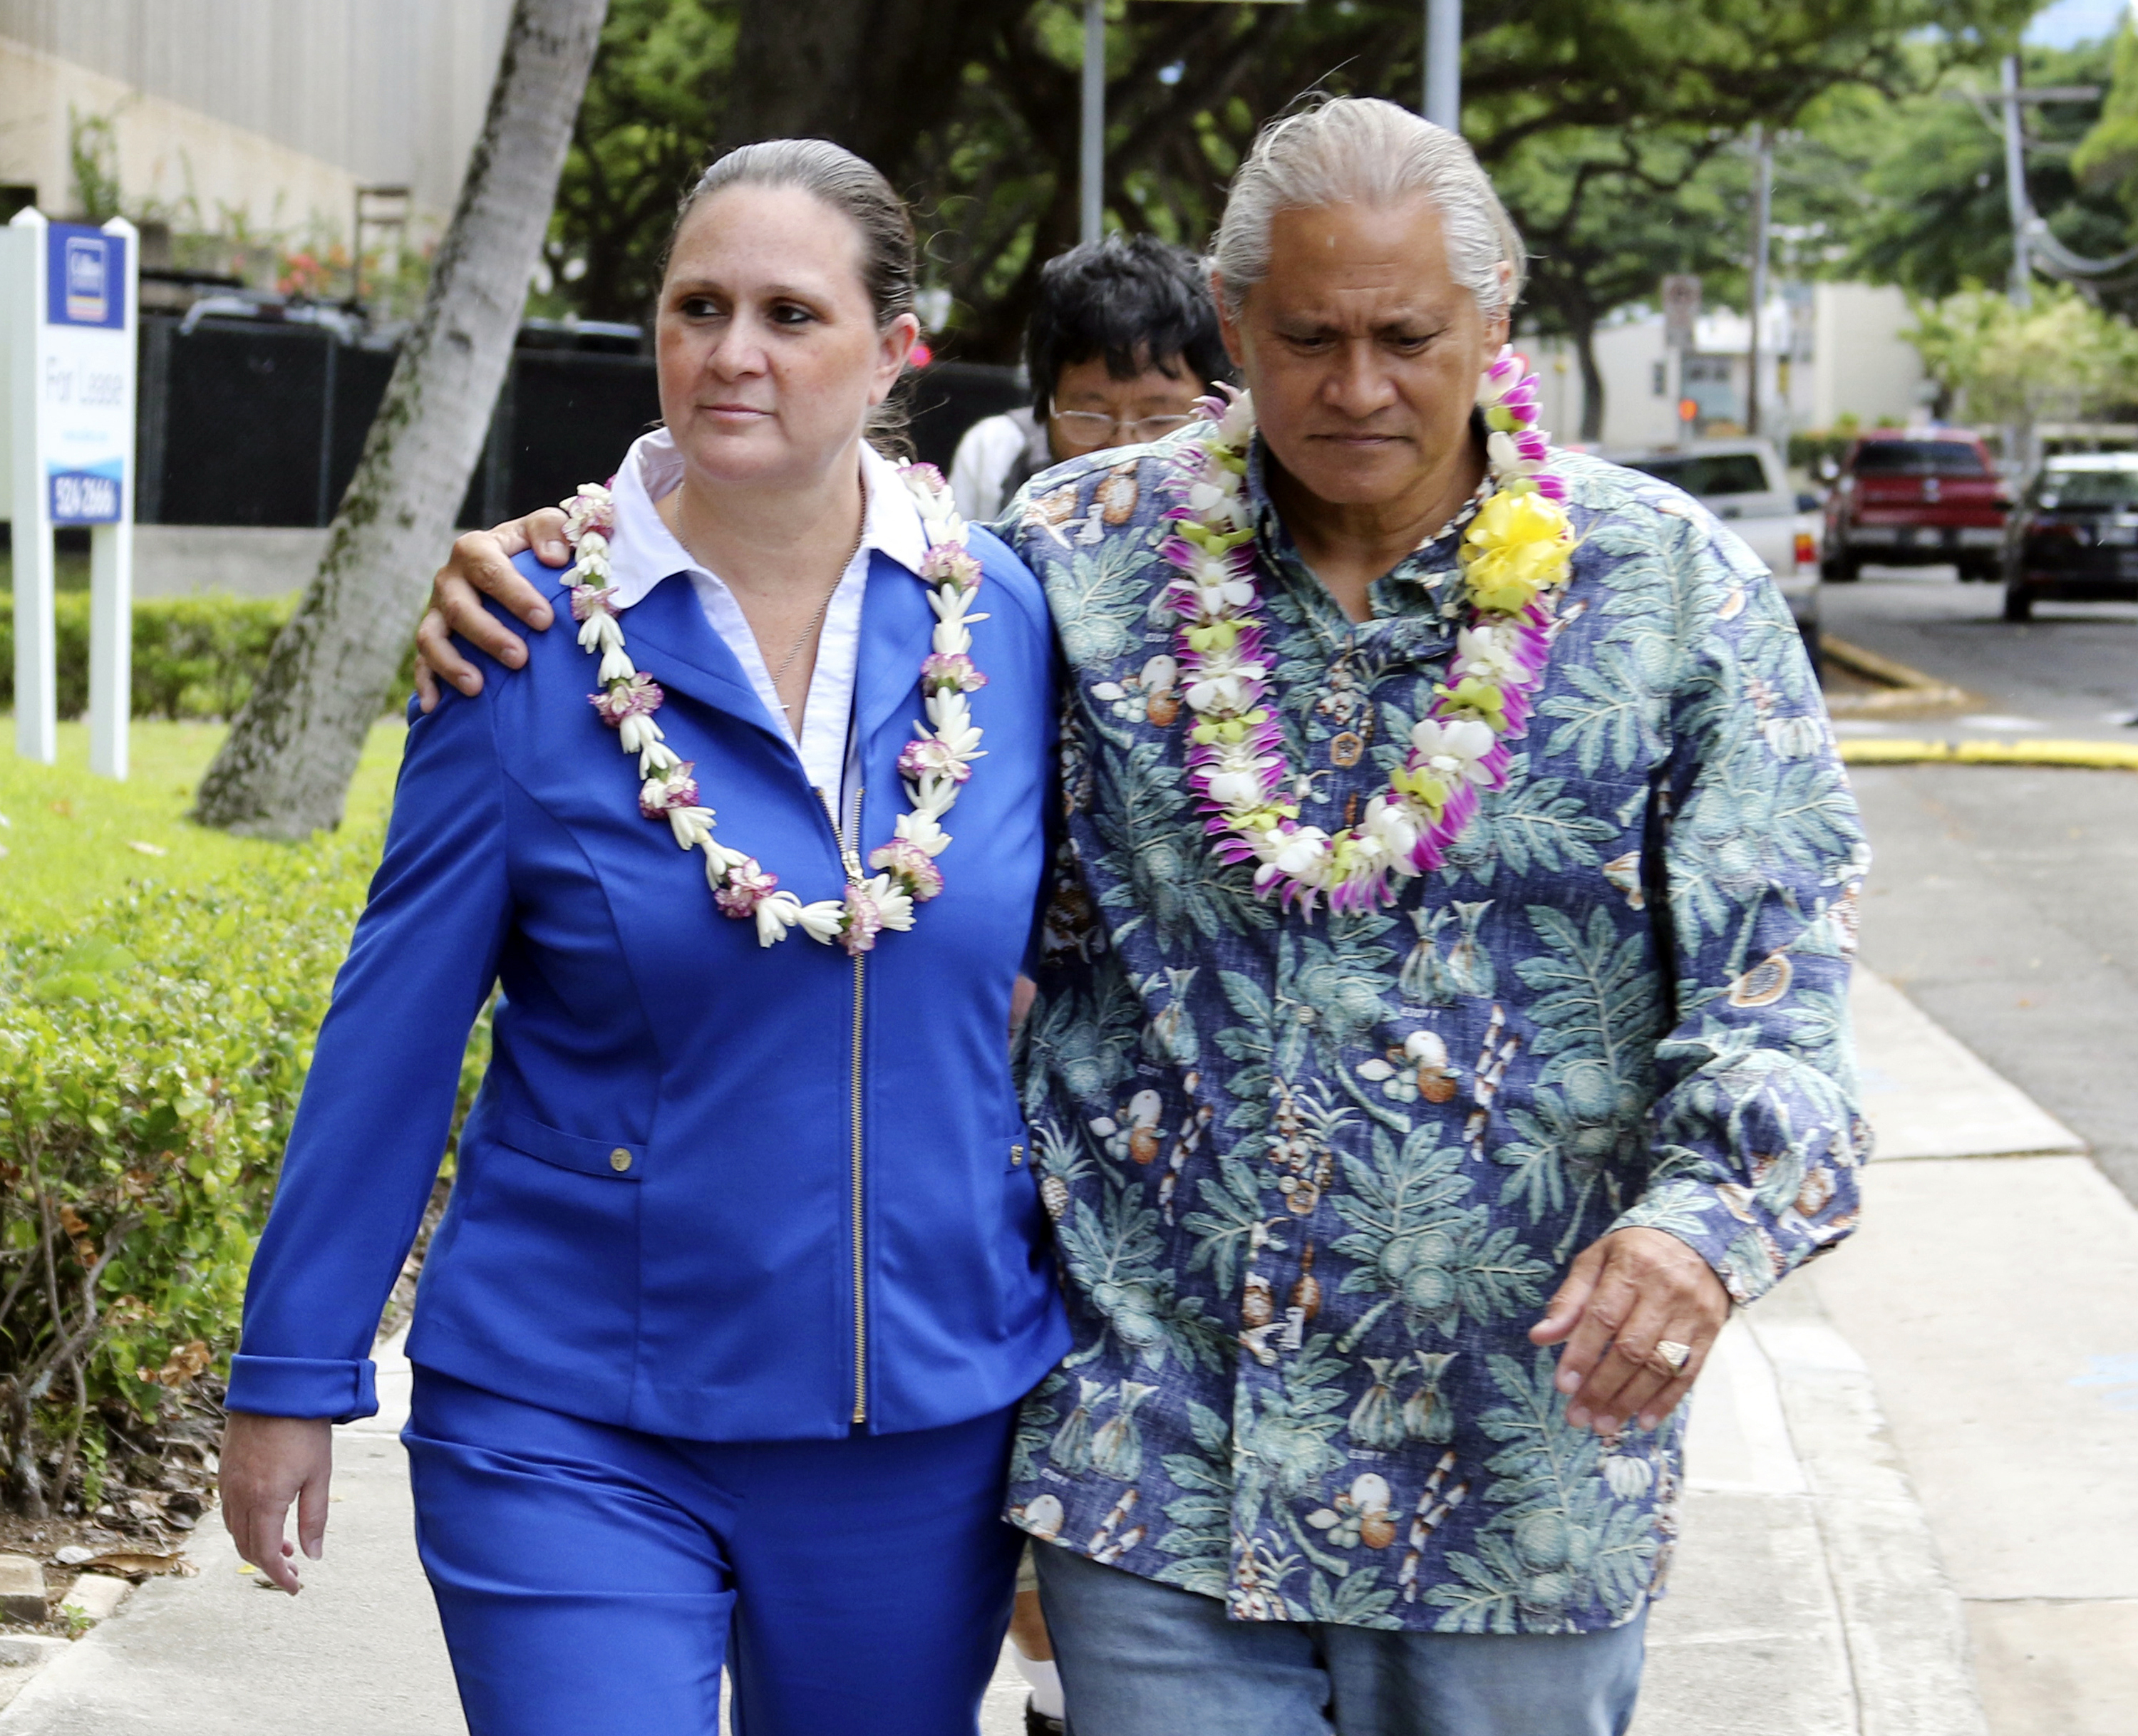 Corruption claims, mailbox send Hawaii power couple to trial